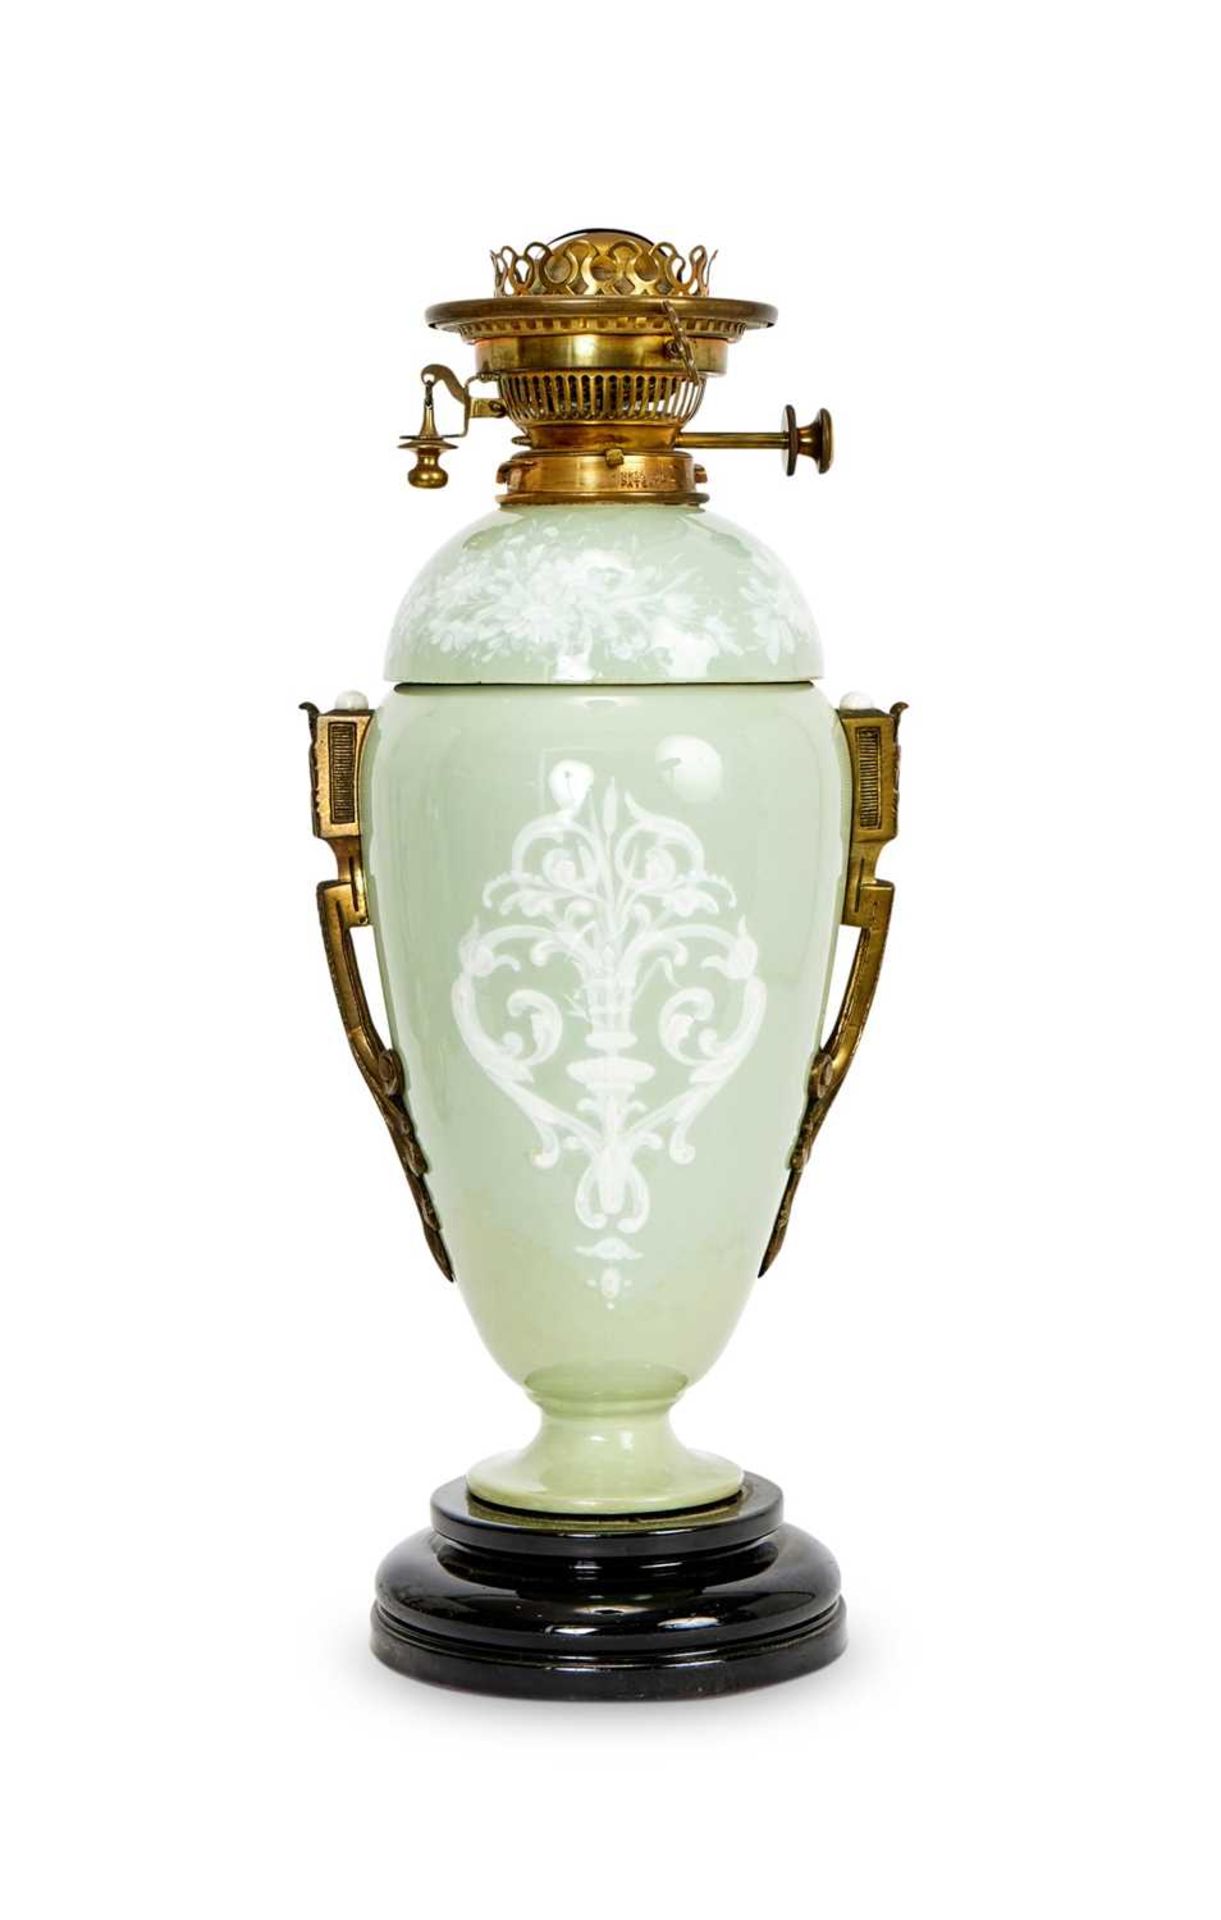 A LATE 19TH CENTURY CELADON PATE SUR PATE PORCELAIN LAMP BASE BY JAMES HINKS - Image 2 of 2